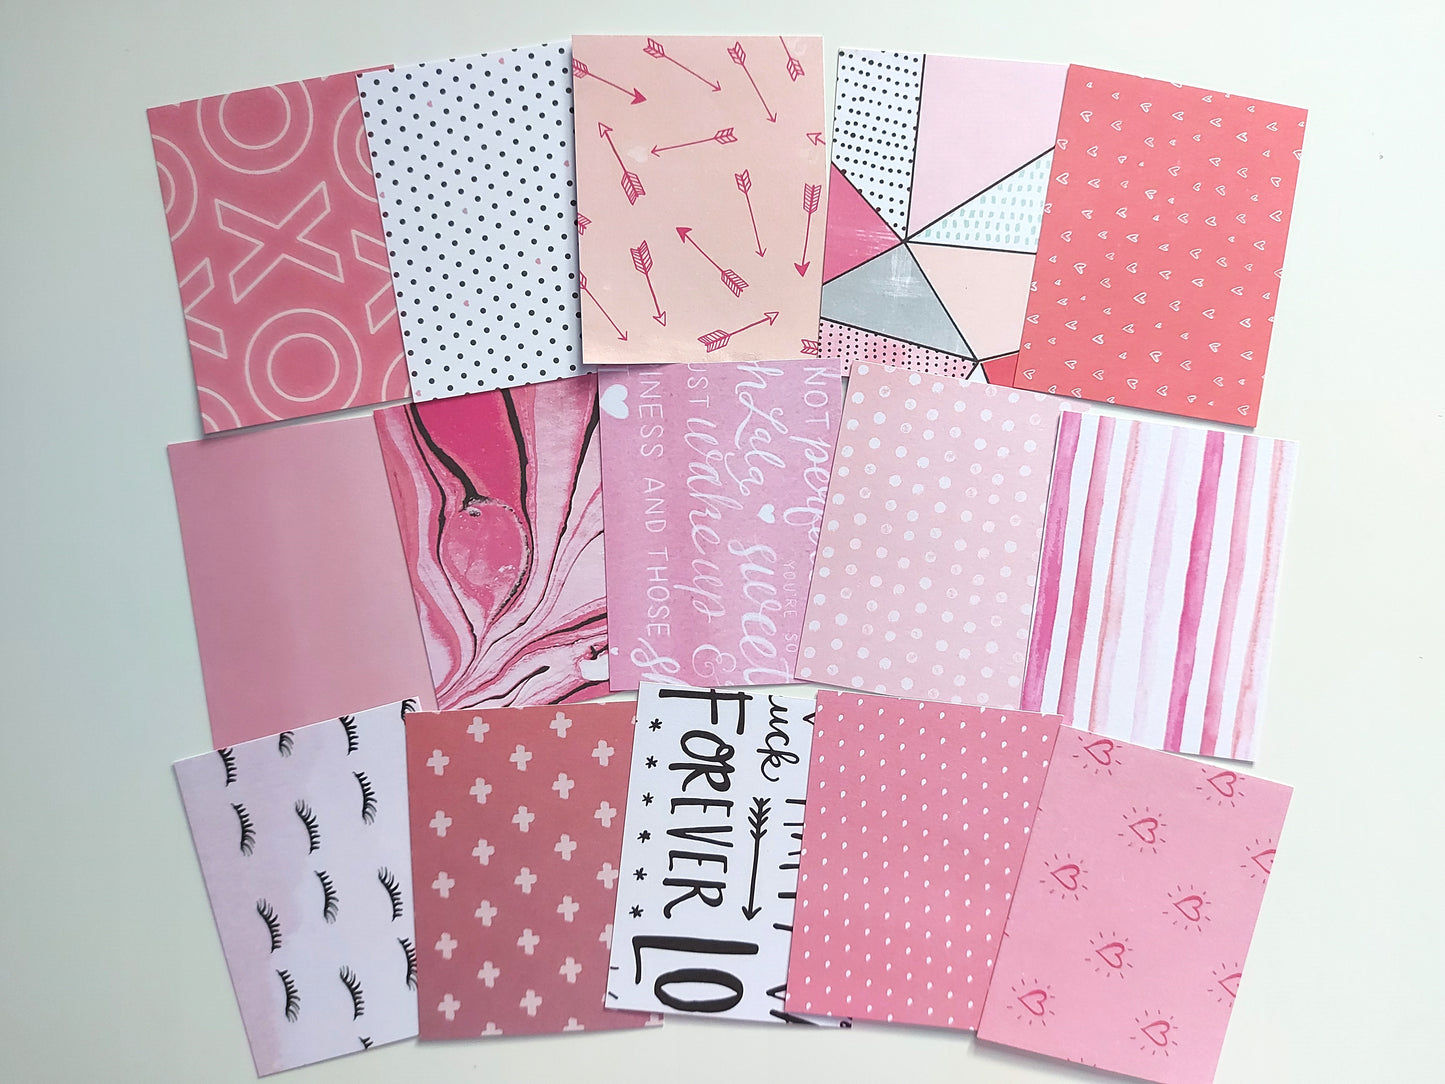 15 3x4 inch Journal Cards |Set 6|